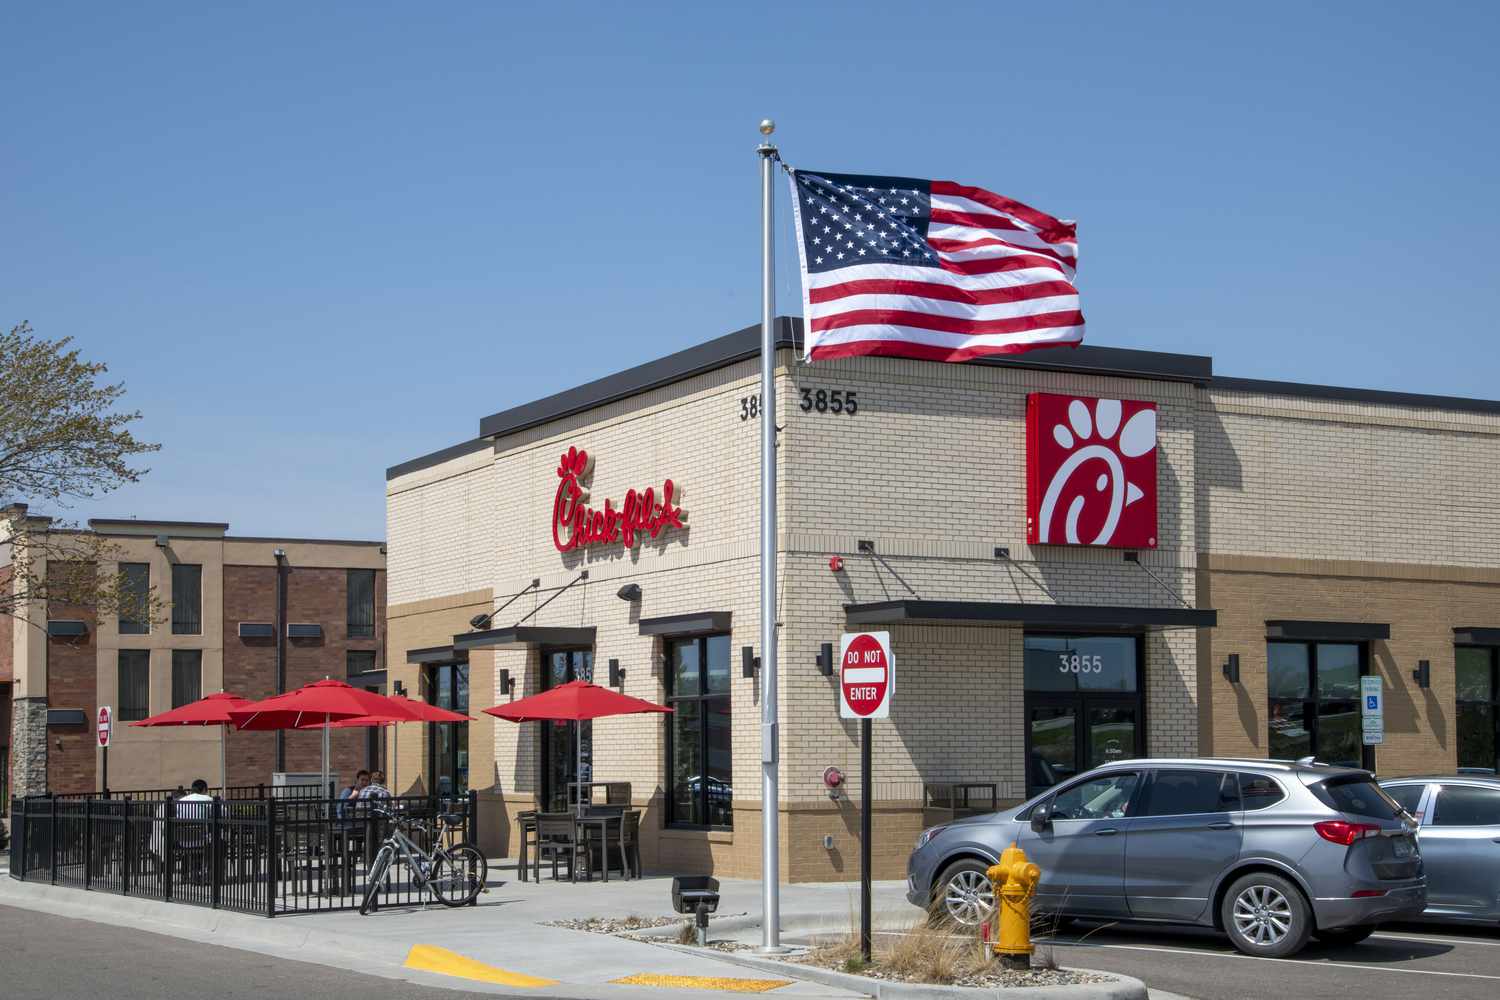 After Nine Years At Number One, Chick-fil-A Is No Longer The Country’s Favorite Fast-Food Chain